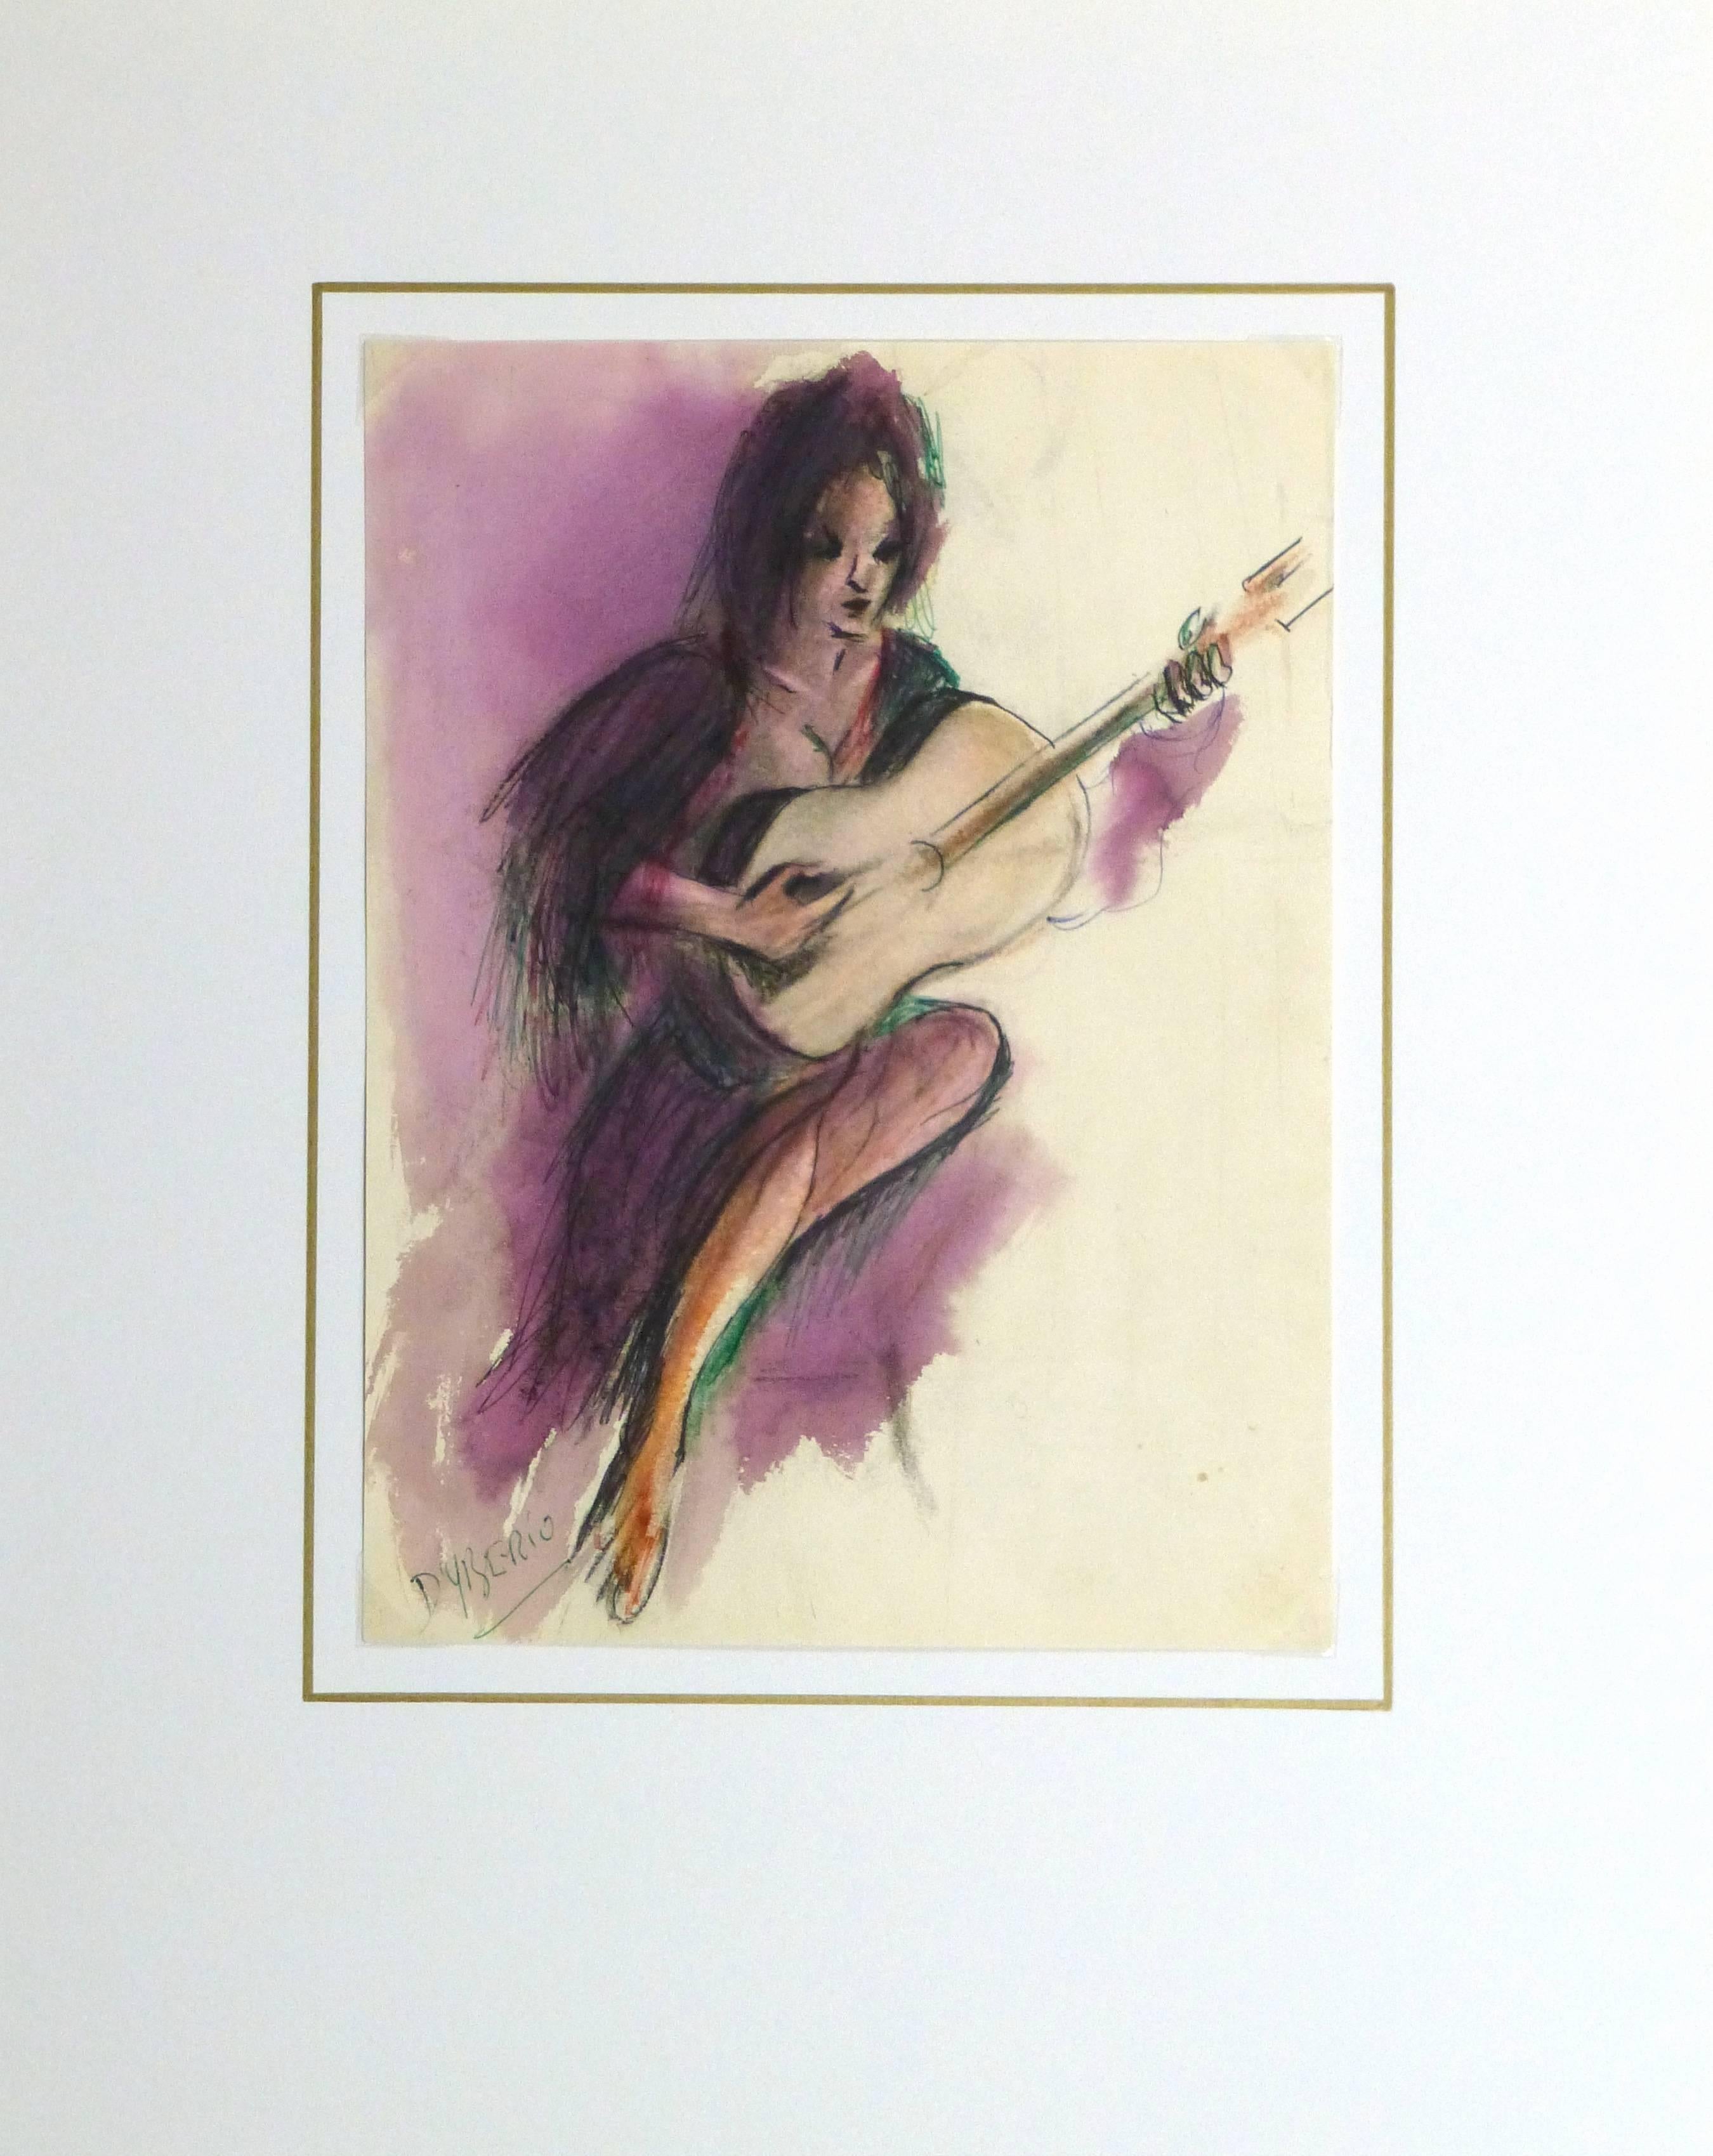 Sensual watercolor and ink painting of a sultry female clad in purple with a purple background playing the guitar by Spanish artist D'Yberio, circa 1960. Signed lower left. 

Original artwork on paper displayed on a white mat with a gold border. Mat